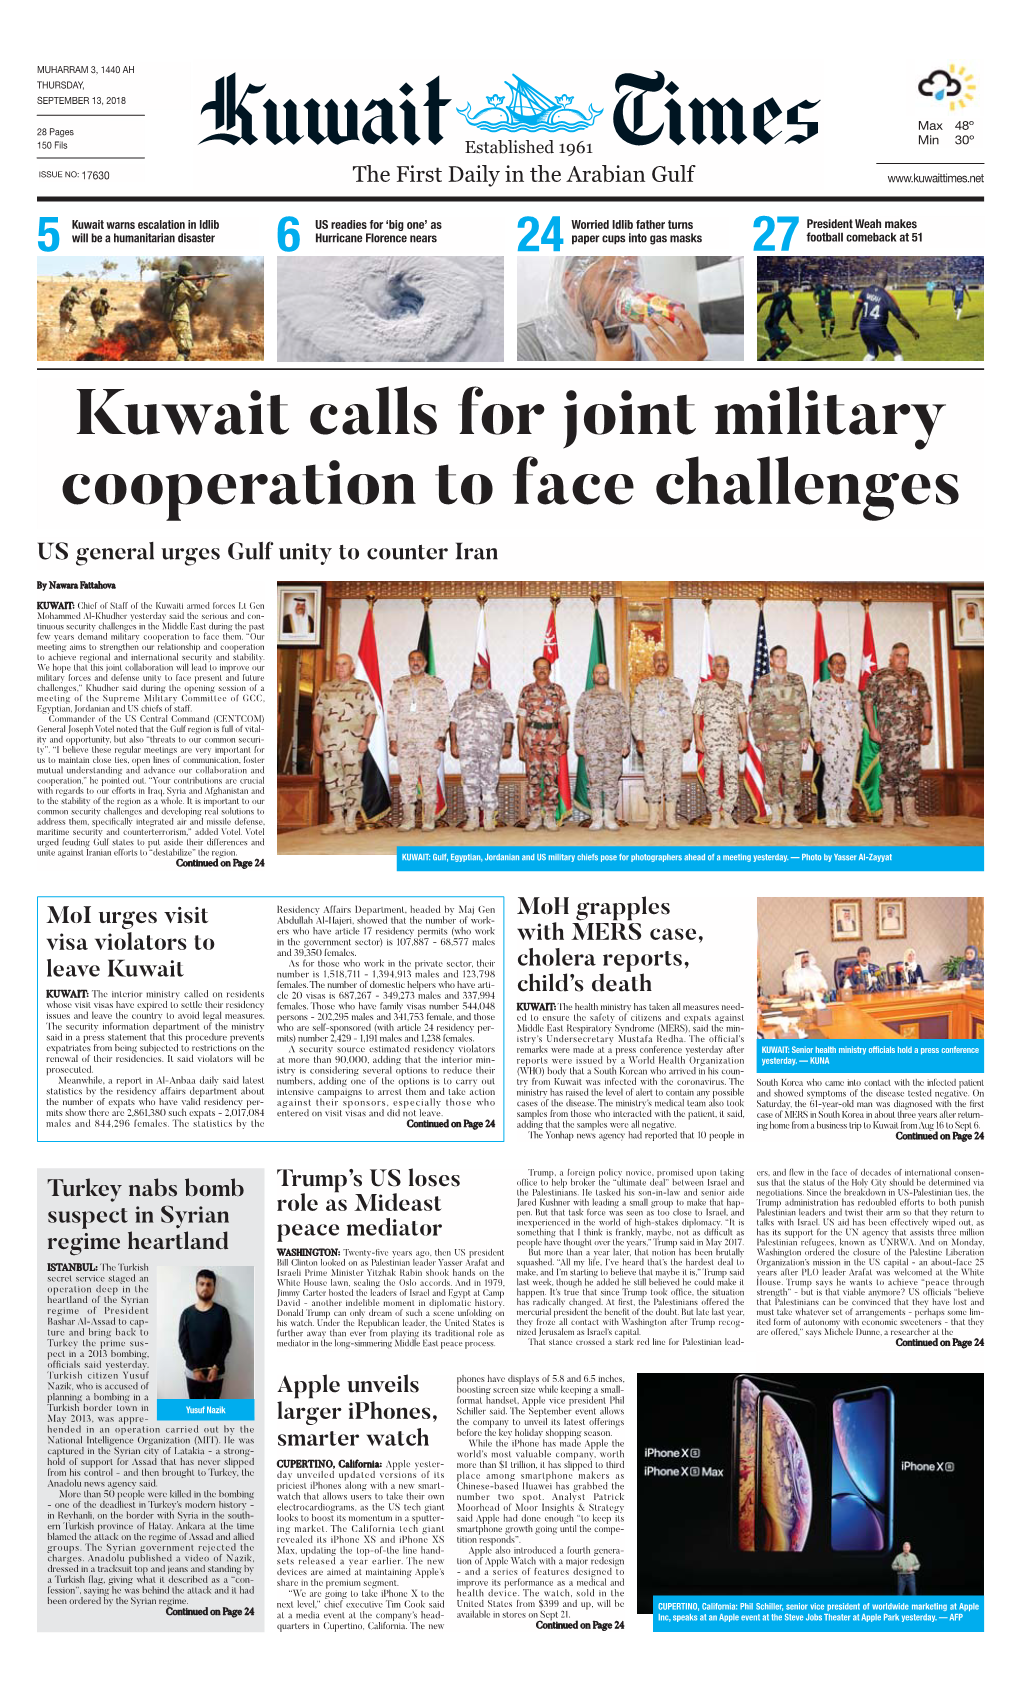 Kuwait Calls for Joint Military Cooperation to Face Challenges US General Urges Gulf Unity to Counter Iran